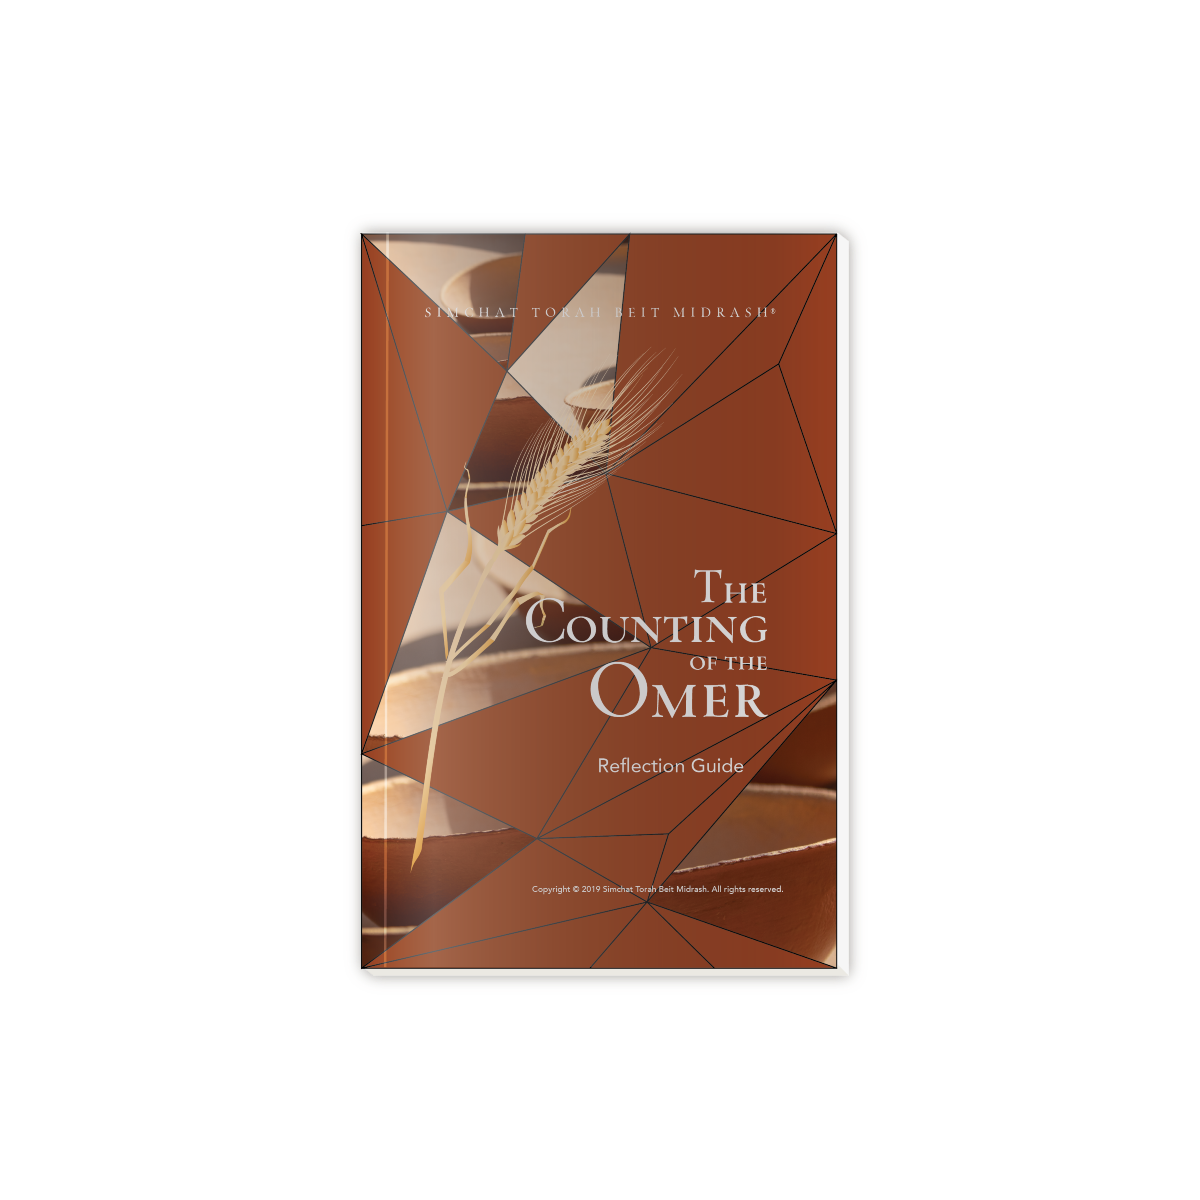 The Counting of the Omer - Reflection Guide